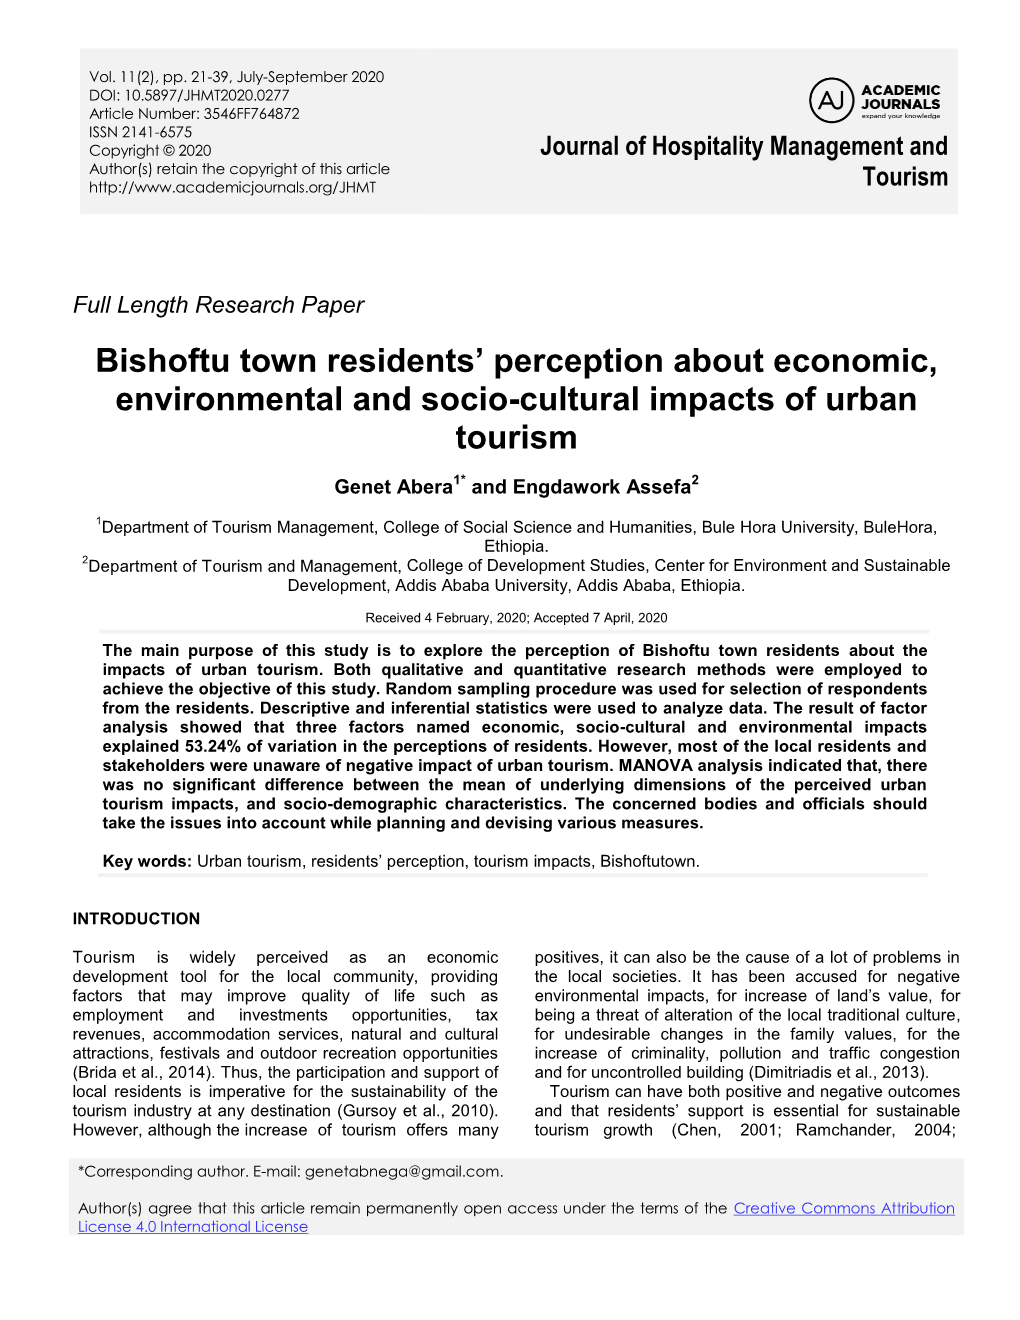 Bishoftu Town Residents' Perception About Economic, Environmental And